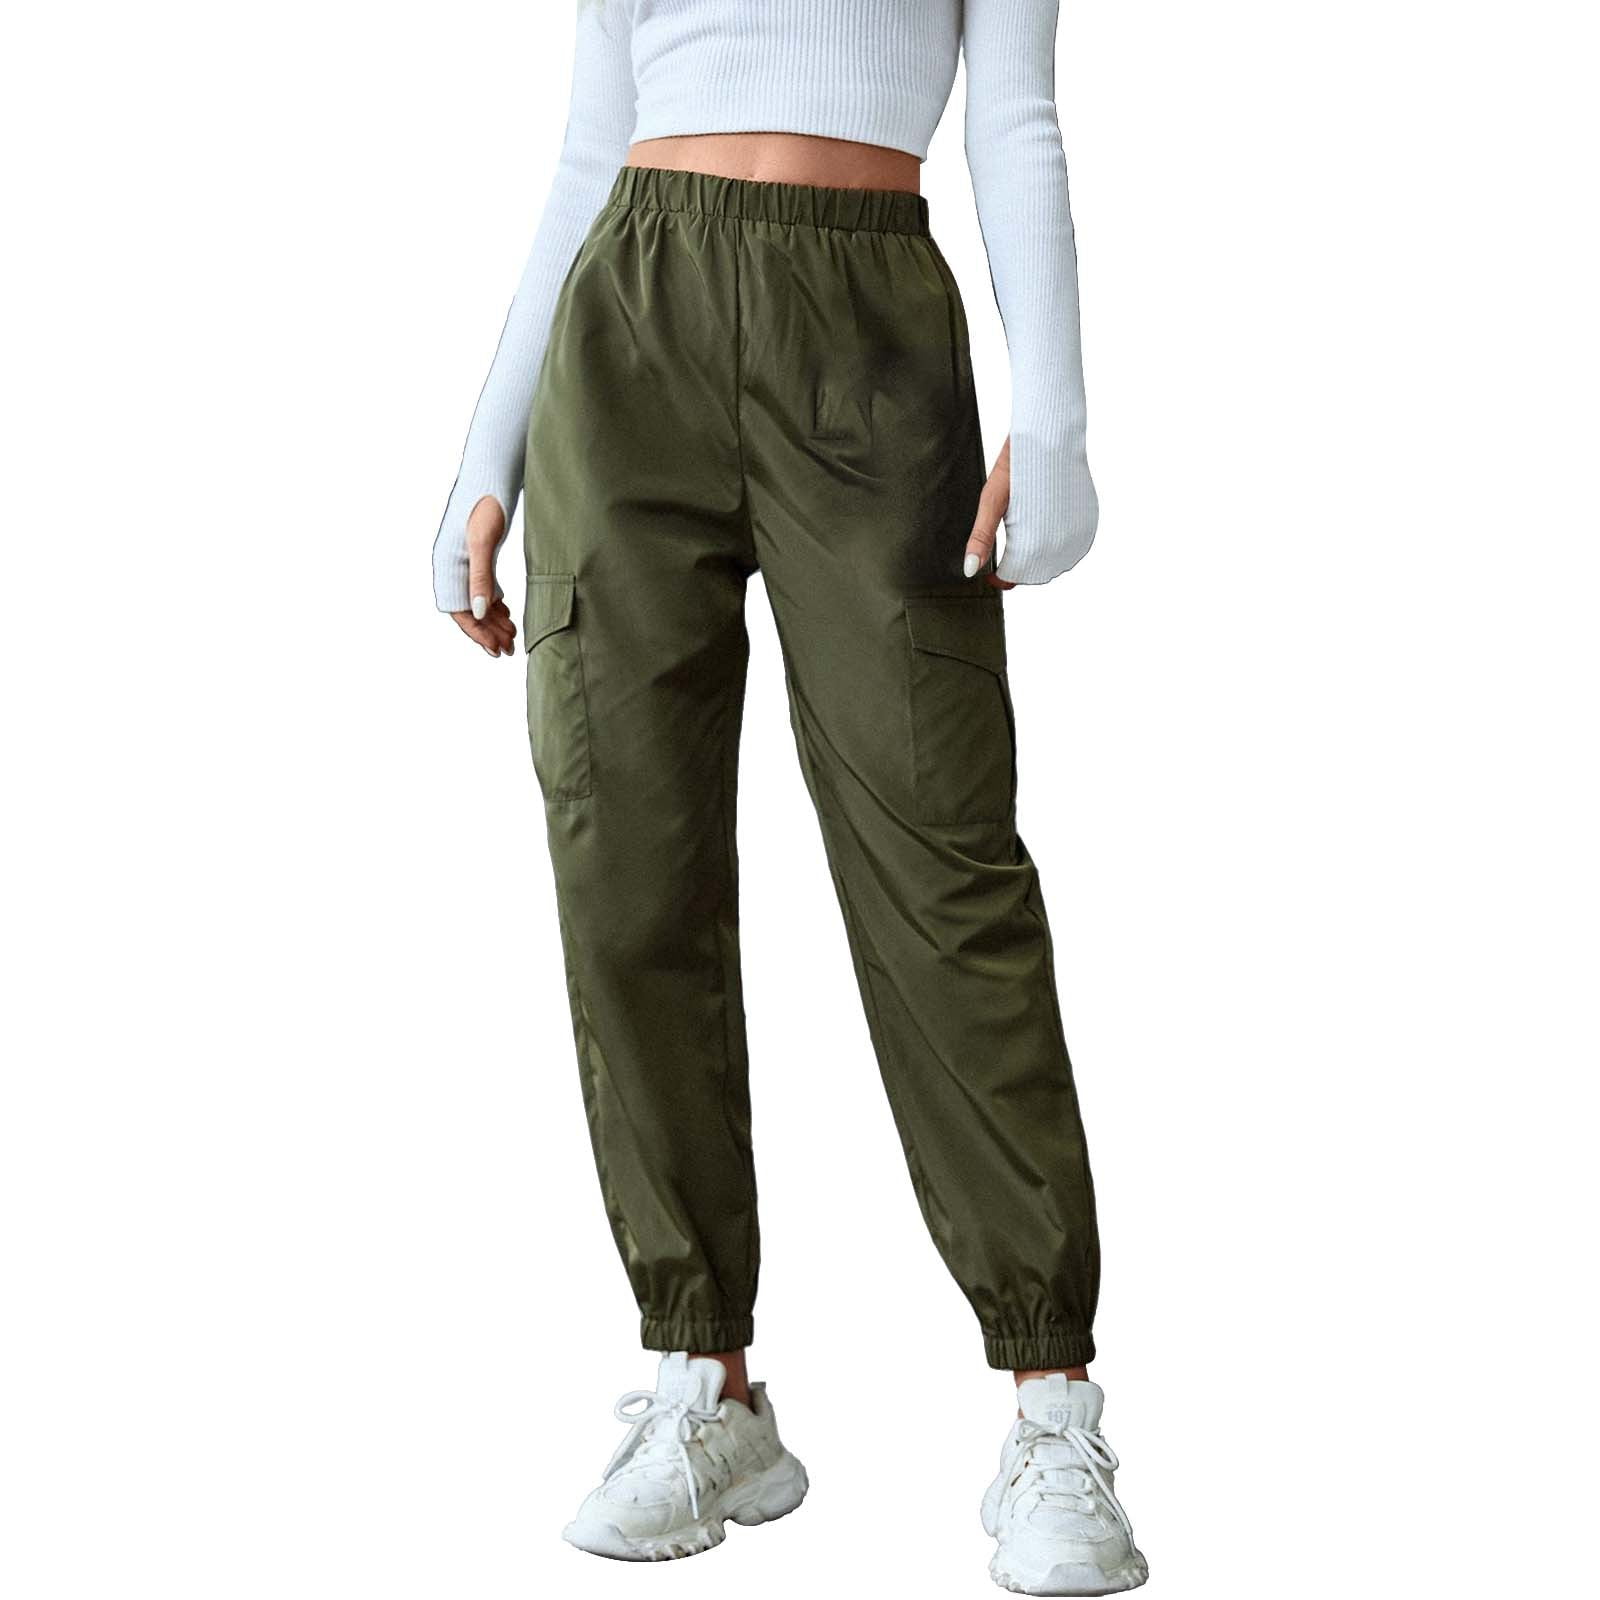 YOLAI Pants for Women Casual Solid Color Cargo Jeggings Trousers With ...